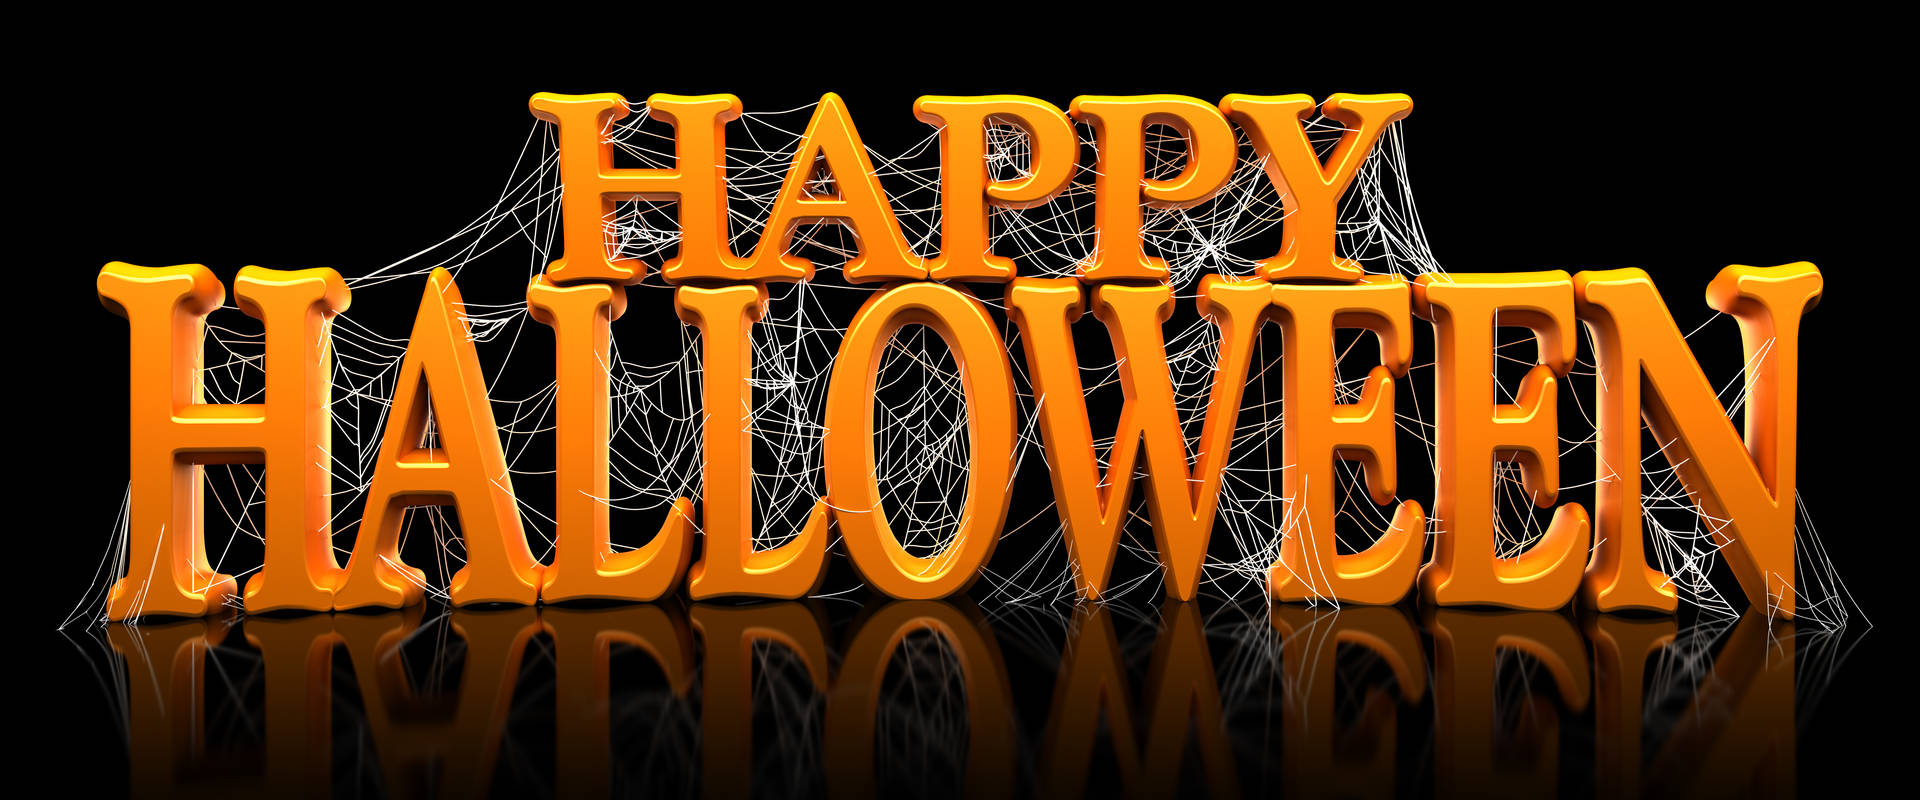 Trick or Treat! Have a Happy Halloween Wallpaper